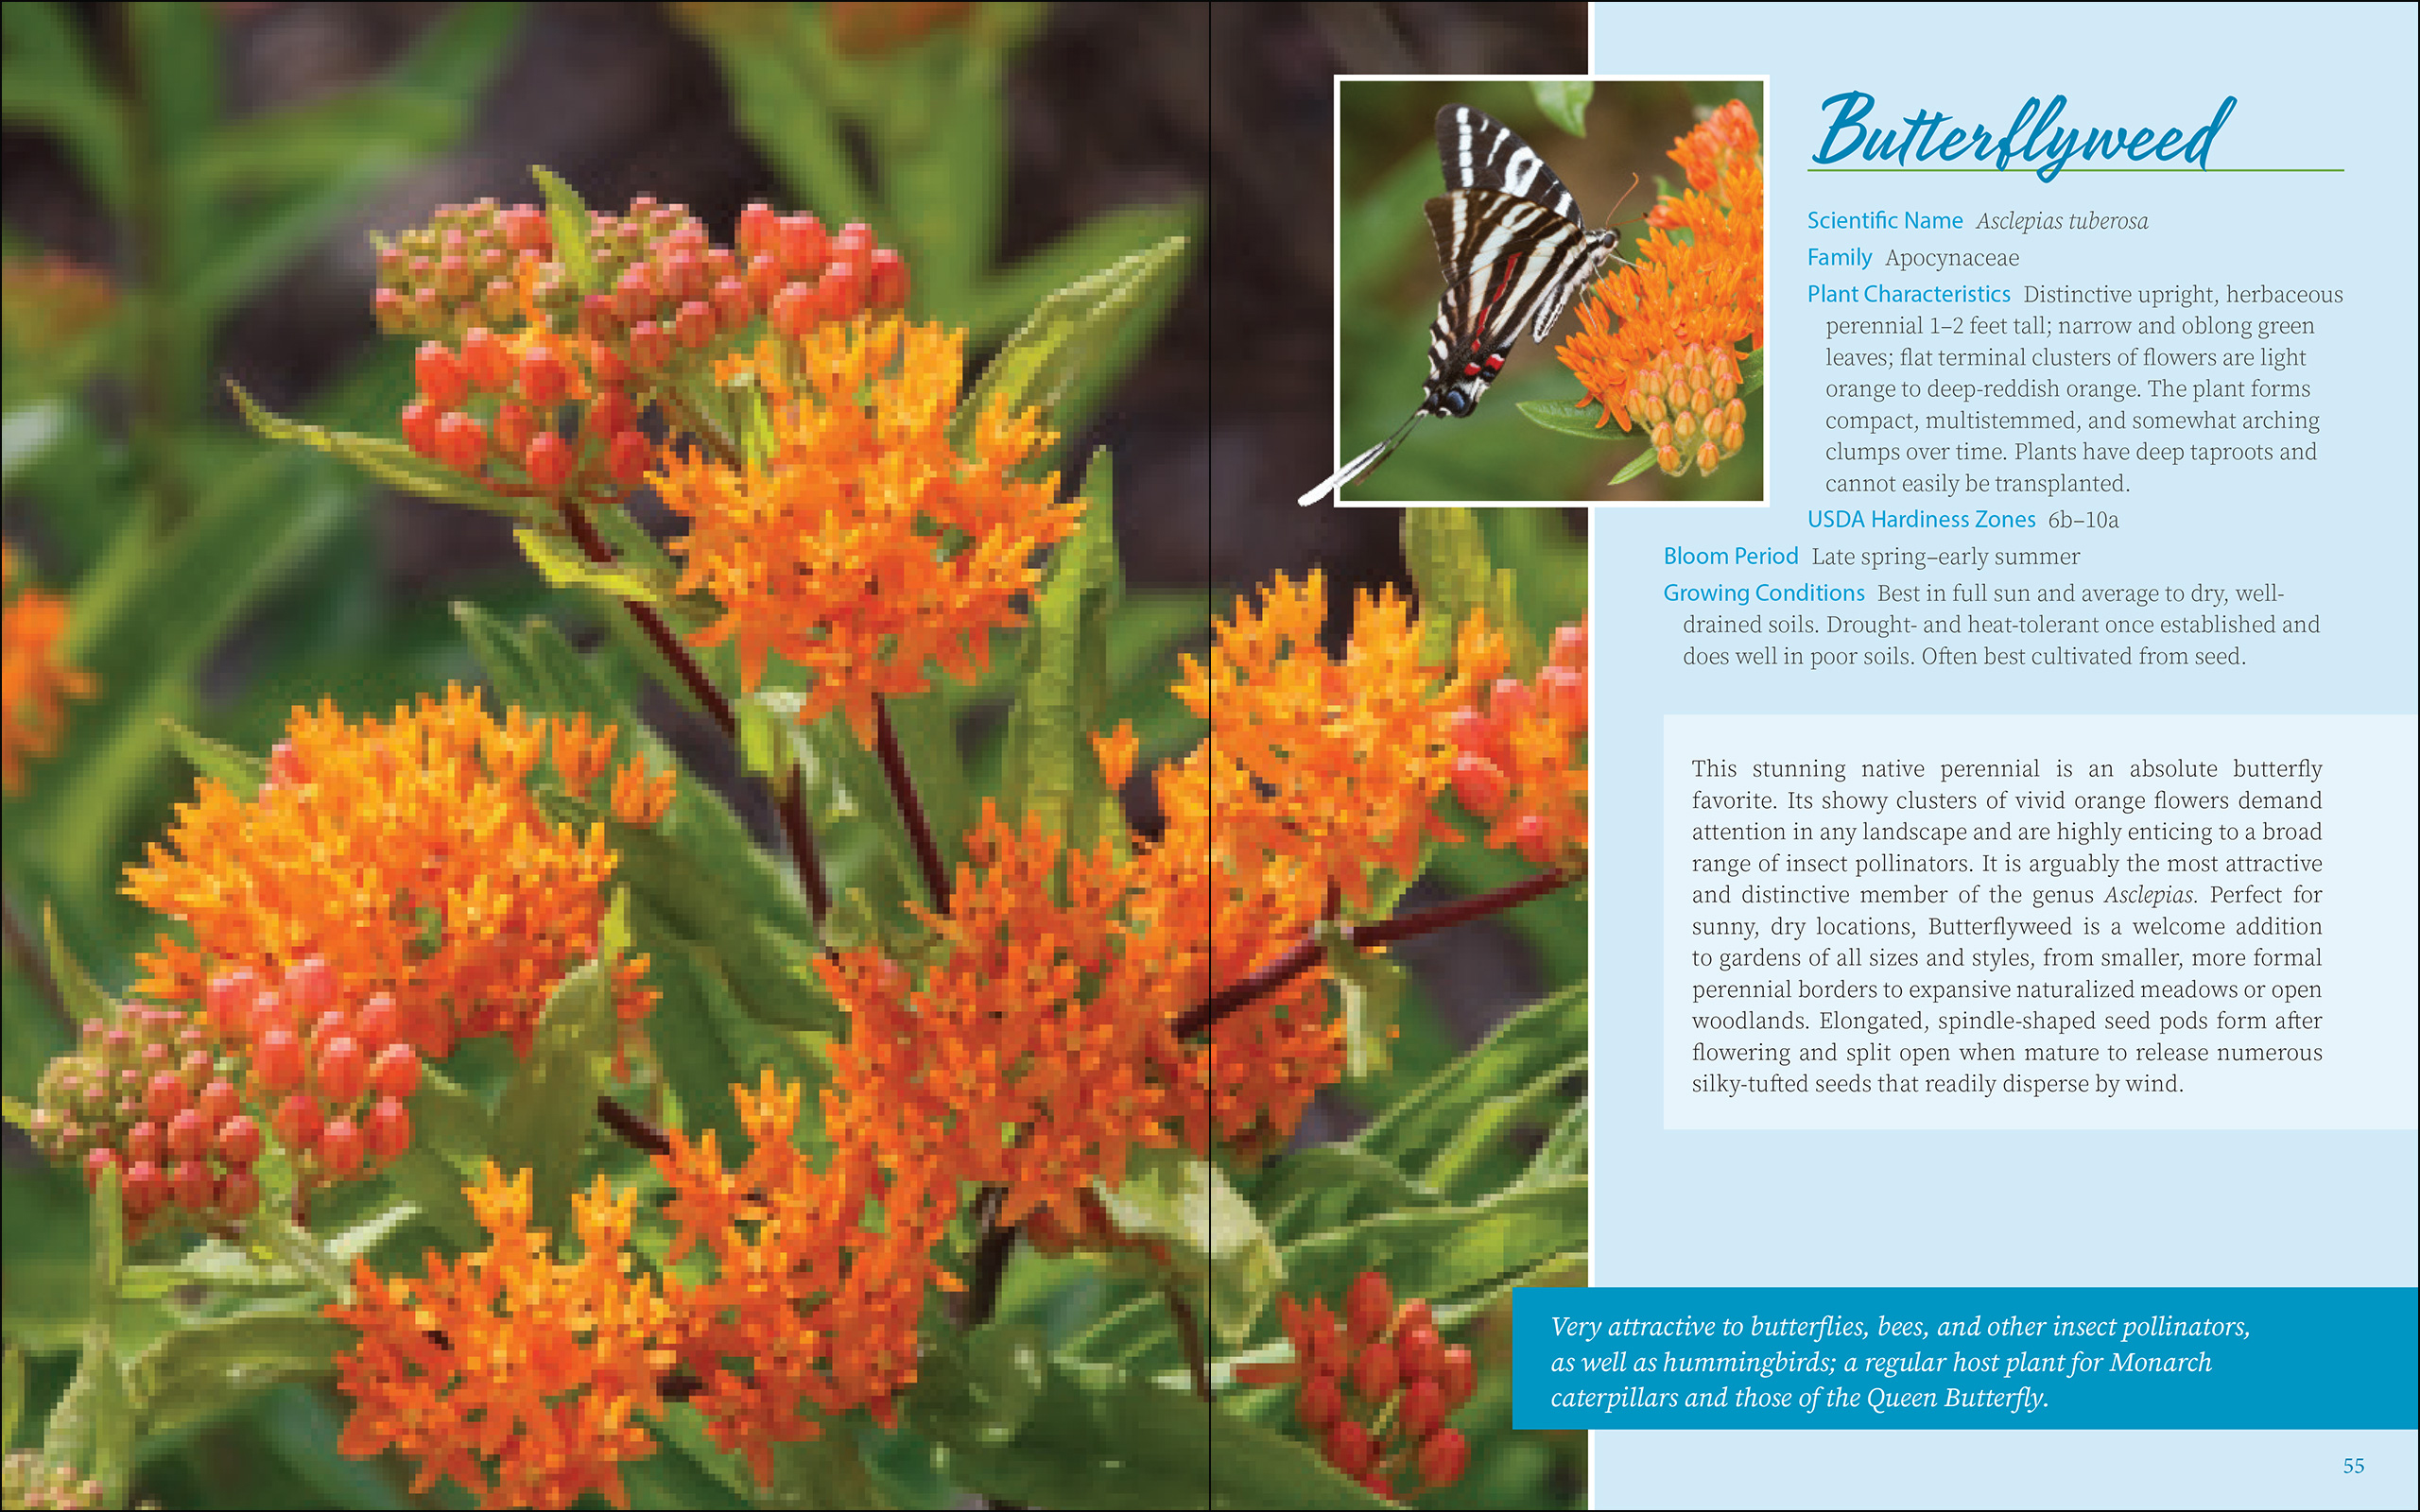 Native Plant Gardening for Birds, Bees & Butterflies: Lower Midwest